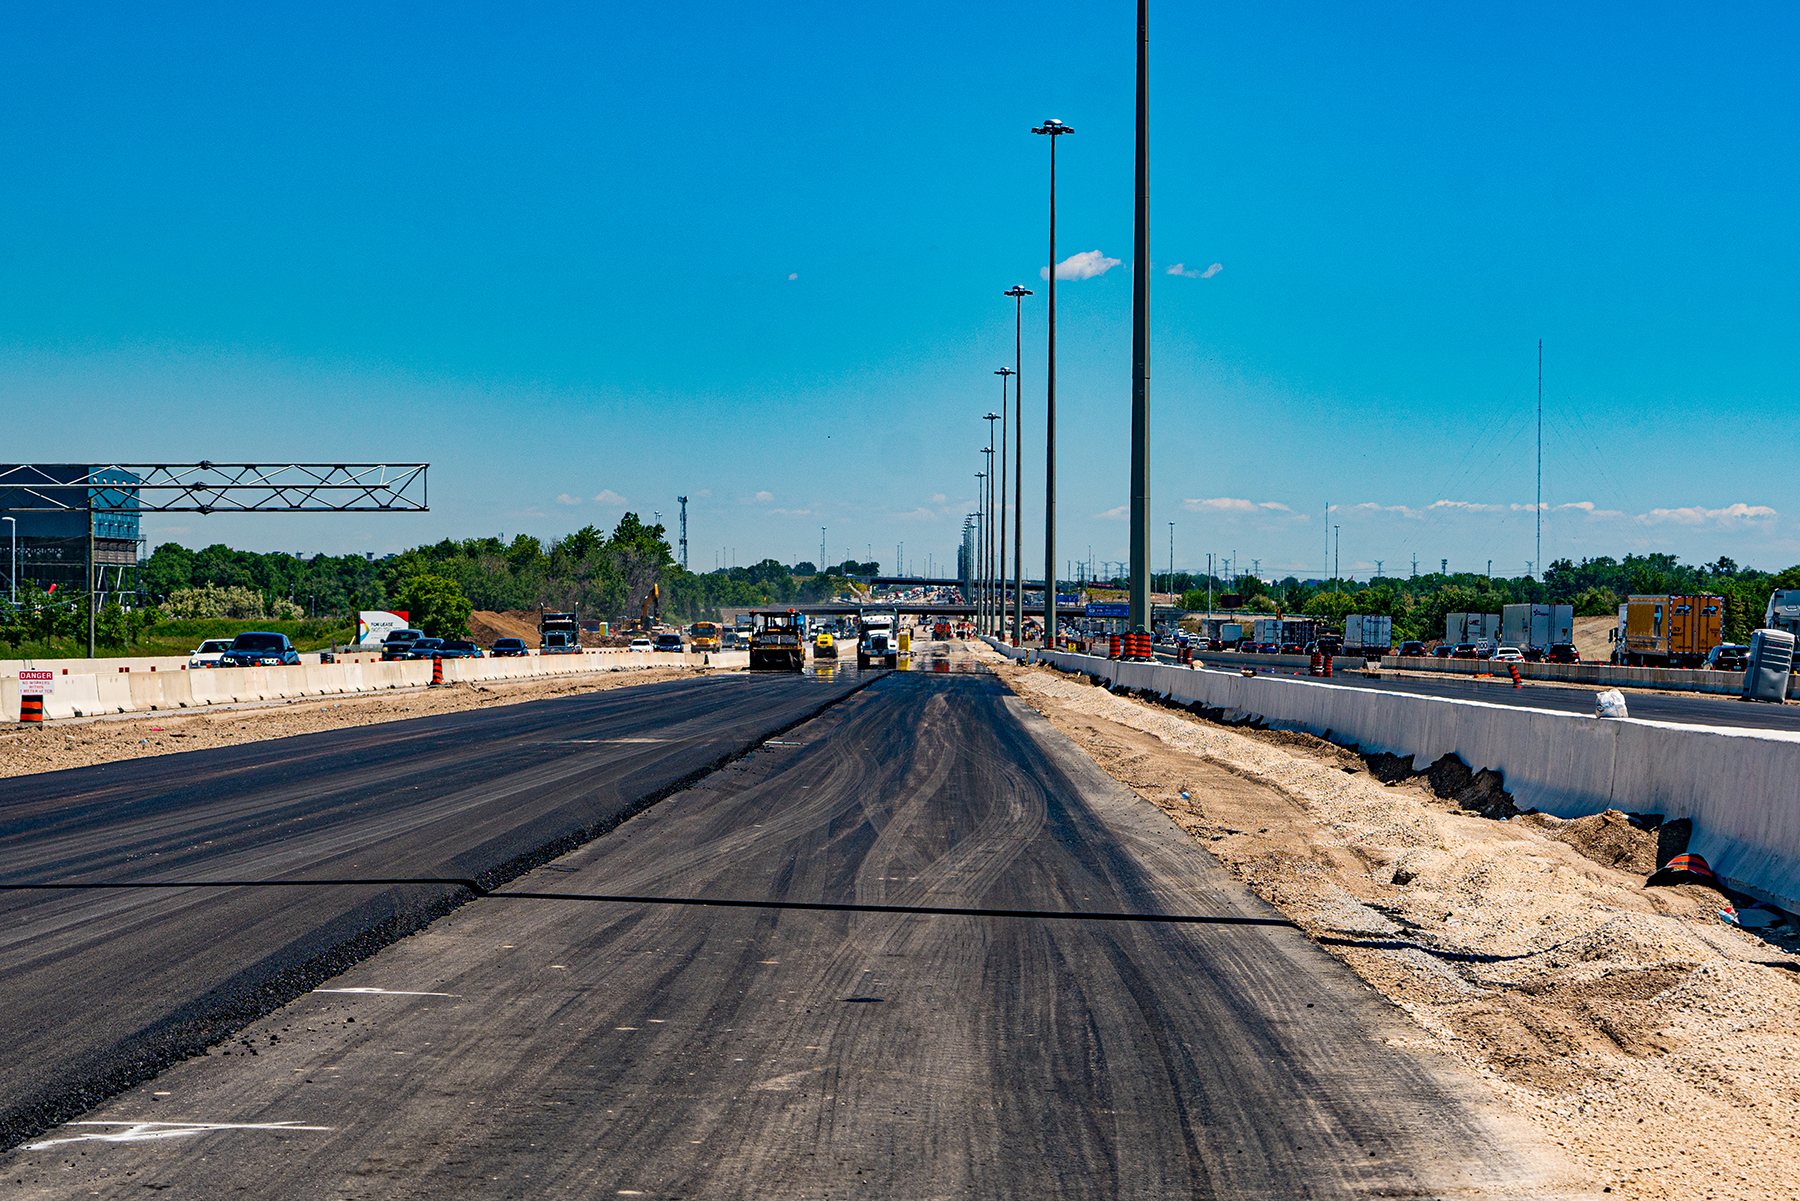 Asphalt Paving Works on the Centre Lanes Nearing Sixth Line